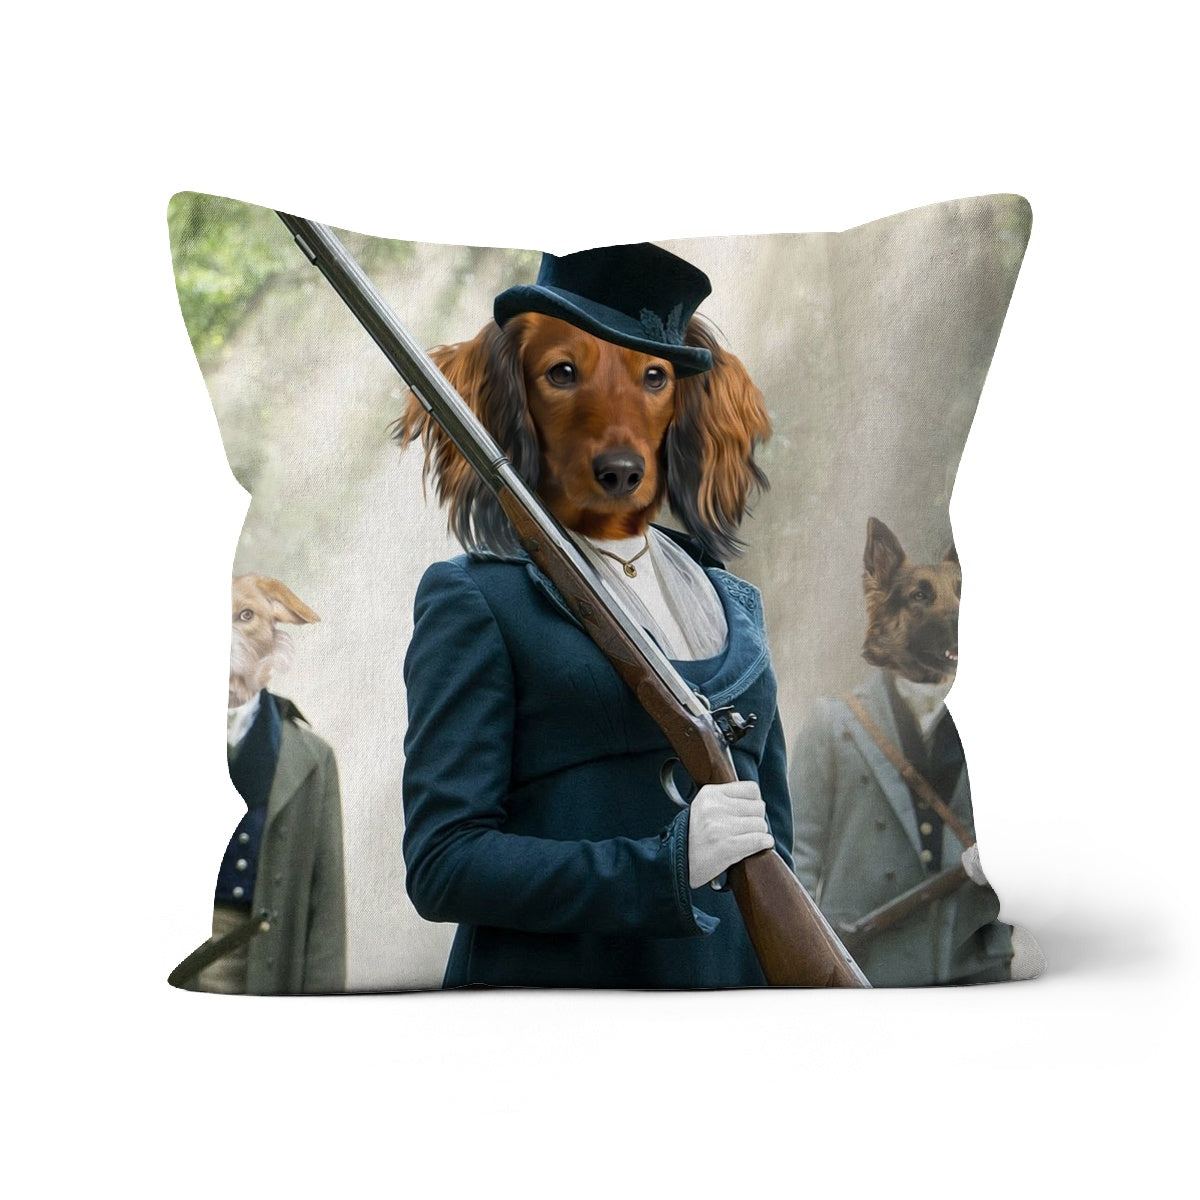 The Kate (Bridgerton Inspired): Custom Pet Cushion, Paw & Glory, paw and glory, pillow personalized, pet pillow, pillow custom, personalised dog pillows, personalised pet pillows